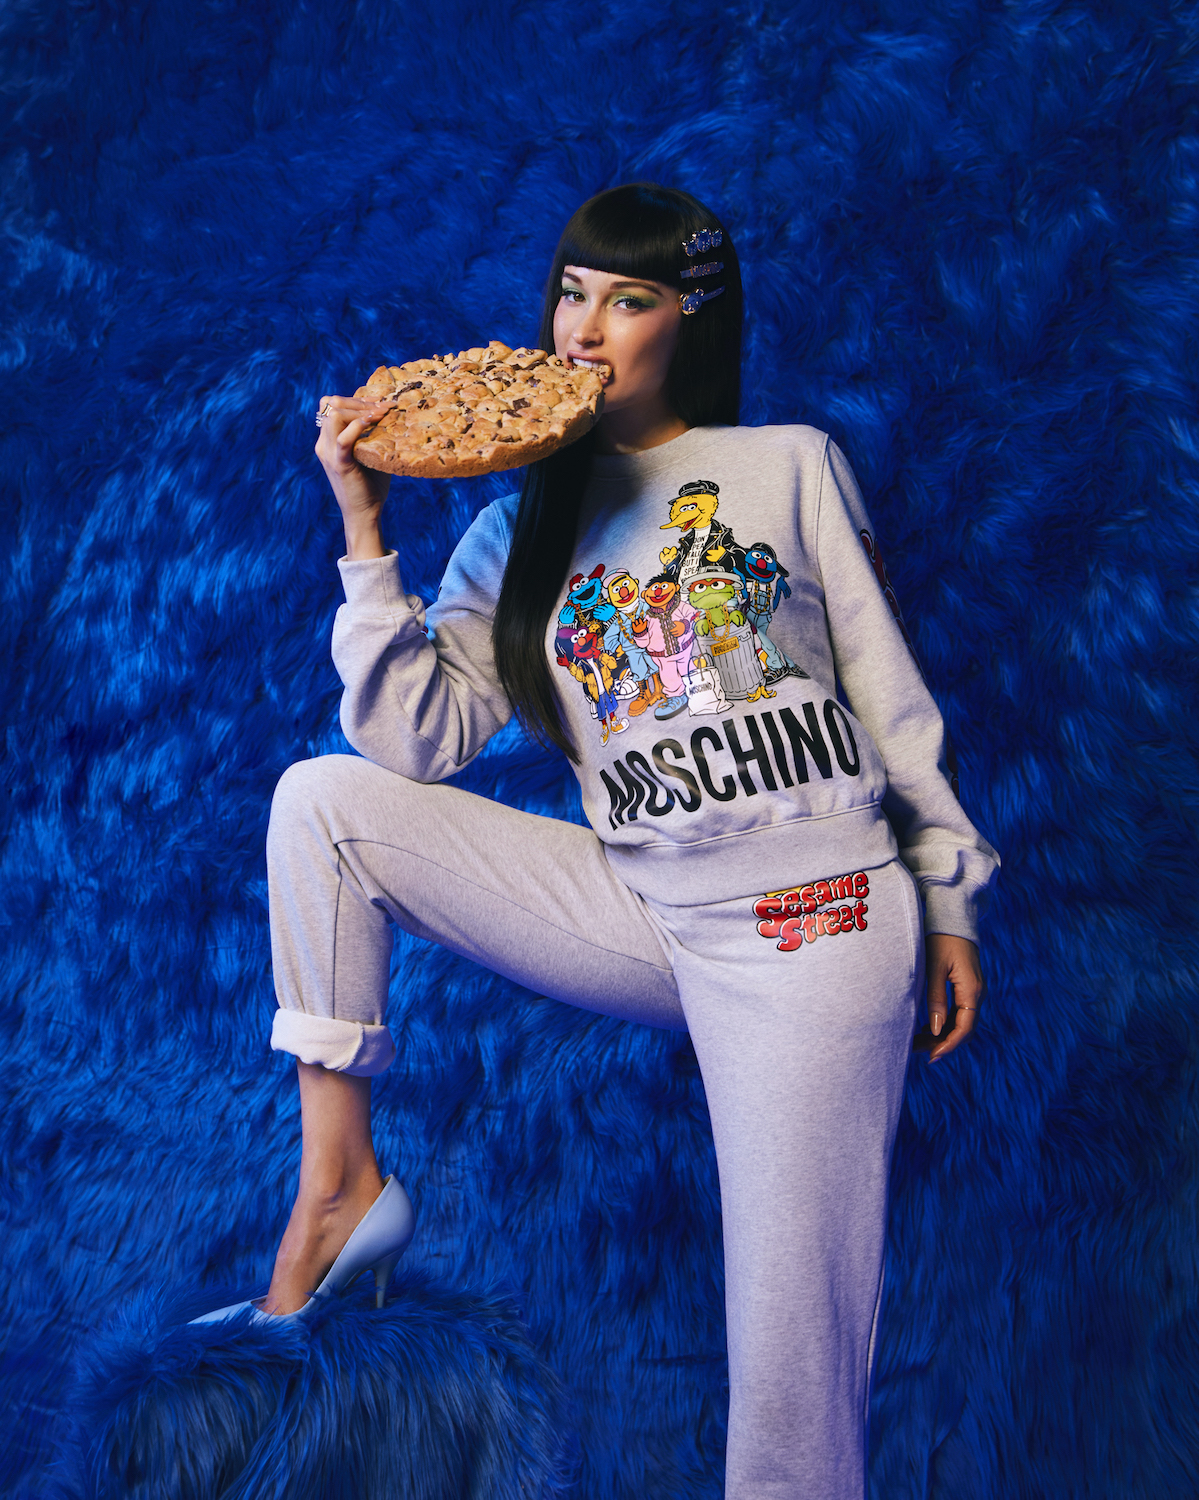  Photo by Greg Swales. Courtesy of Moschino.